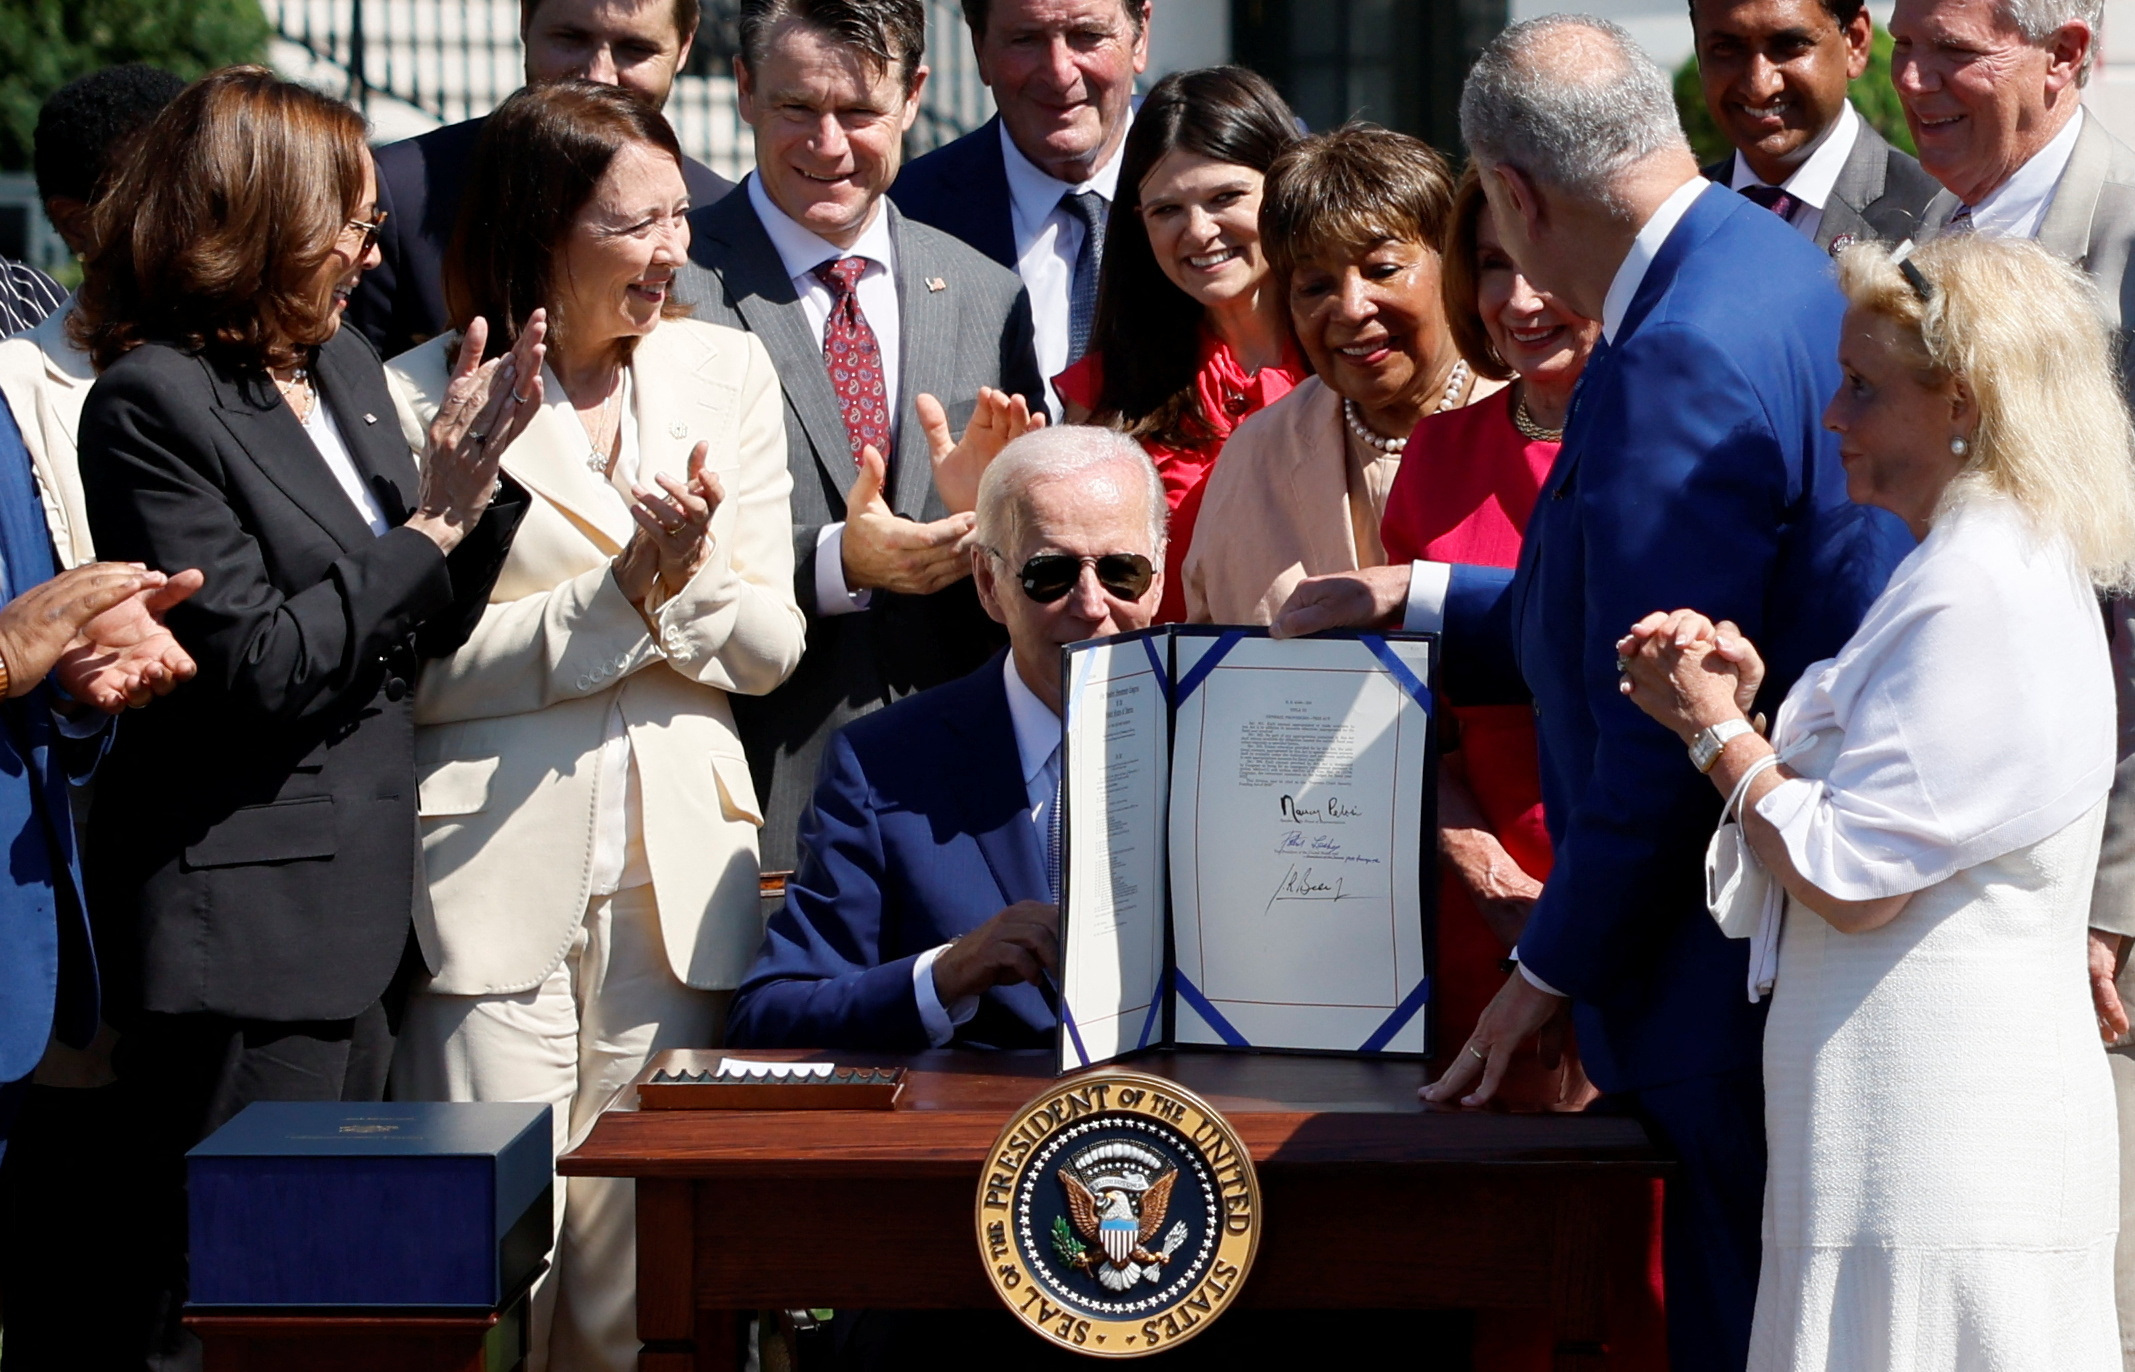 U.S. President Biden signs the CHIPS and Science Act of 2022, in Washington